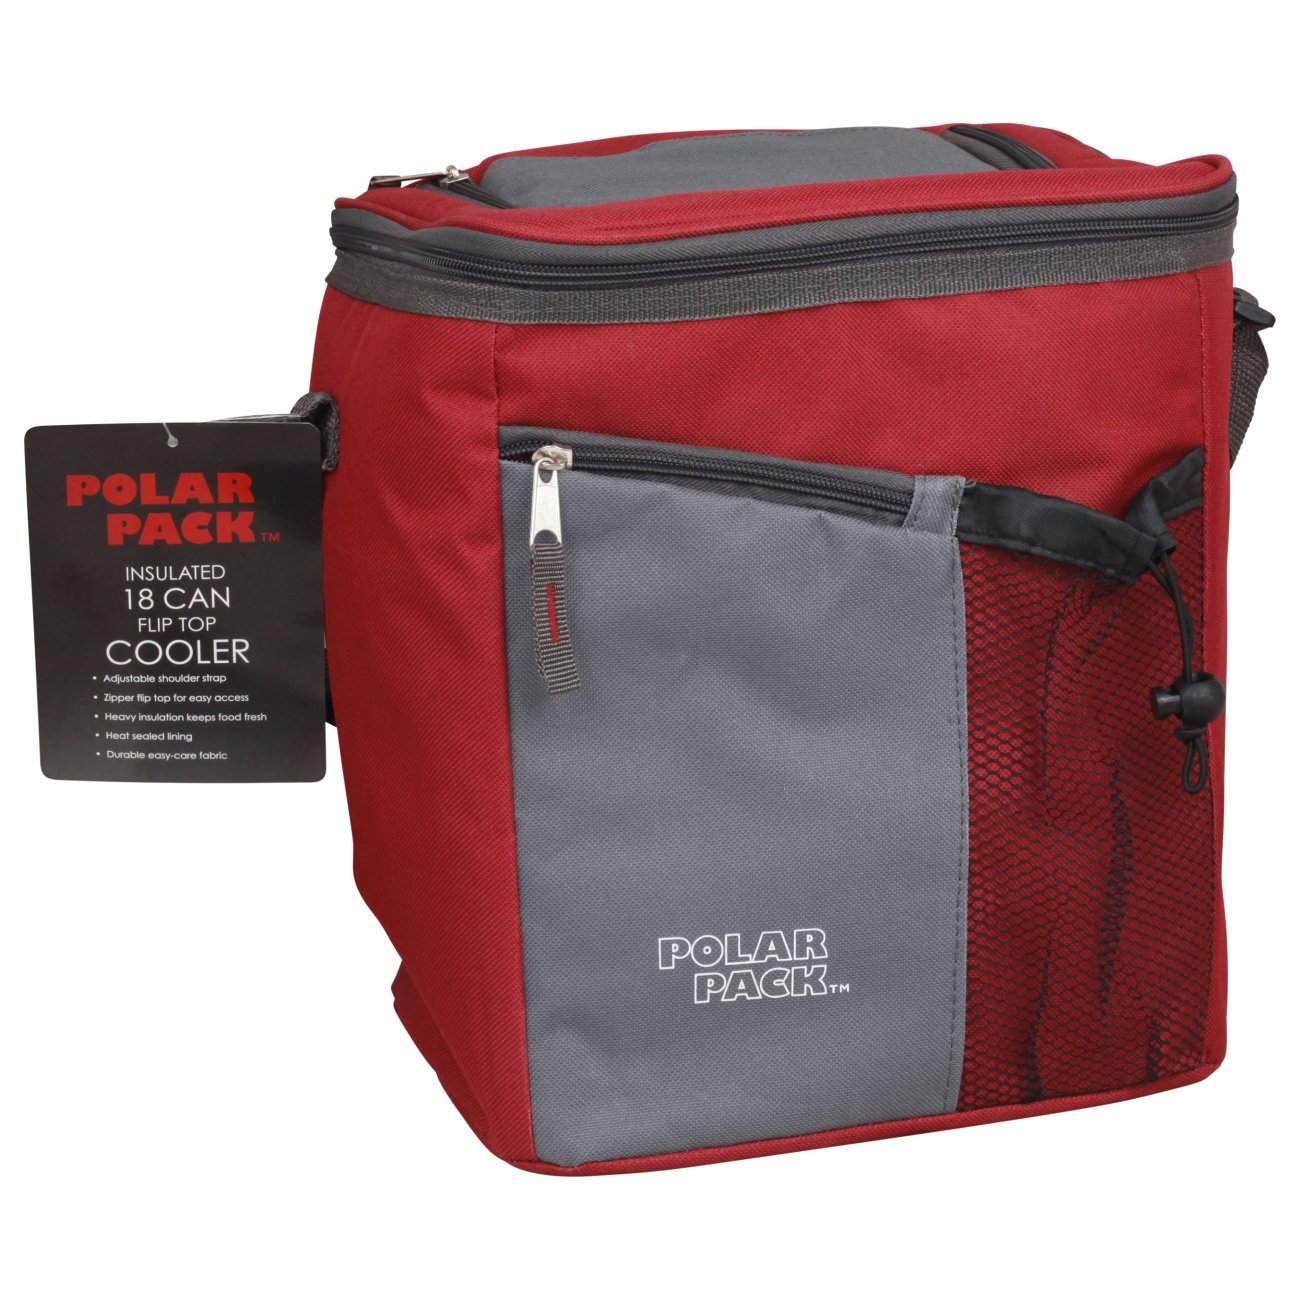 Polar Pack 18 Can Insulated Flip Top Cooler - Shop Coolers & Ice